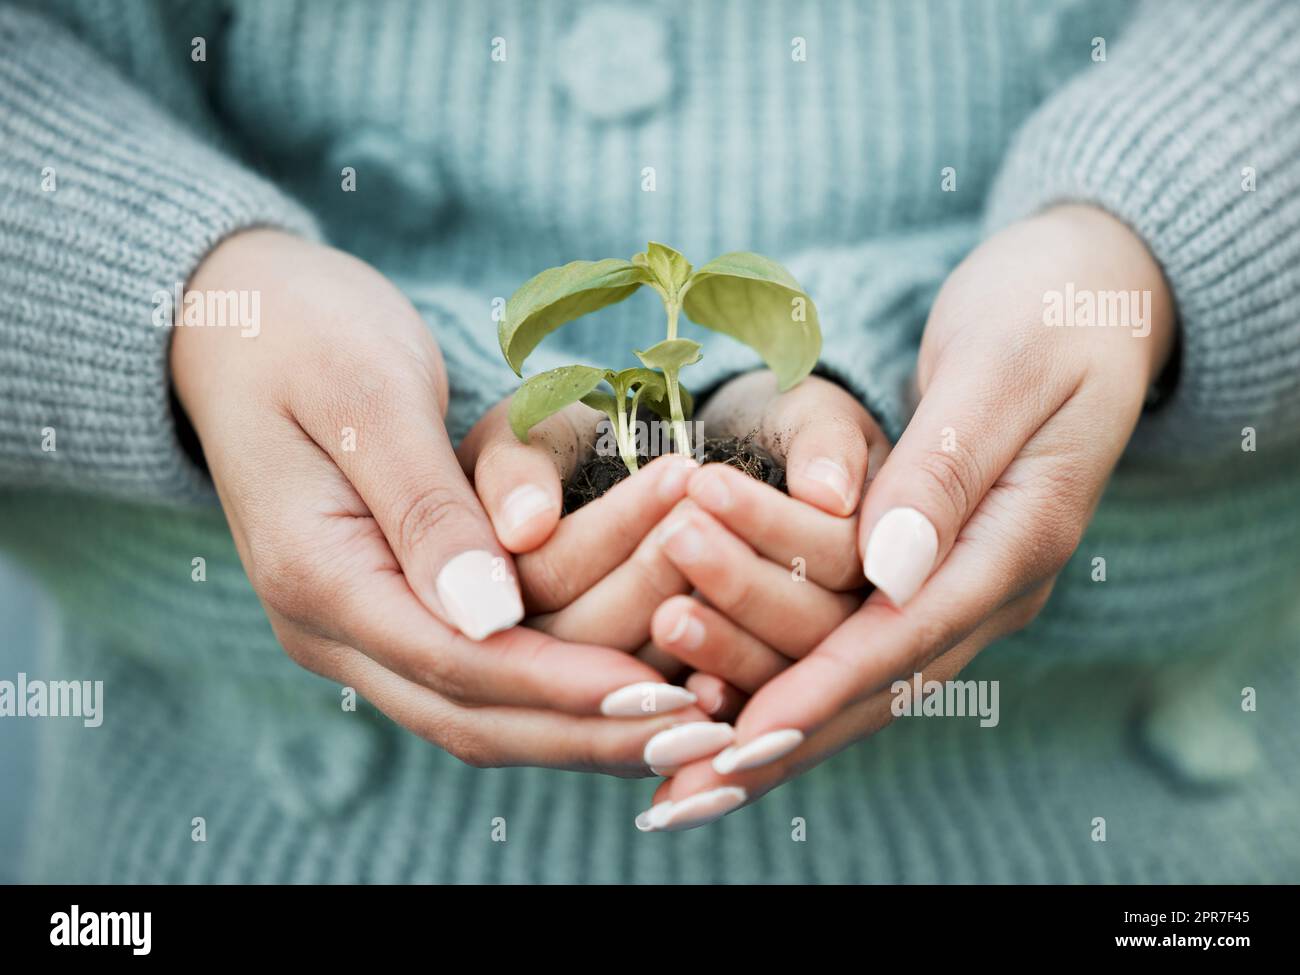 Its the differences within our family that make us unique. Shot of a unrecognizable woman and a little girl holding a plant outside. Stock Photo